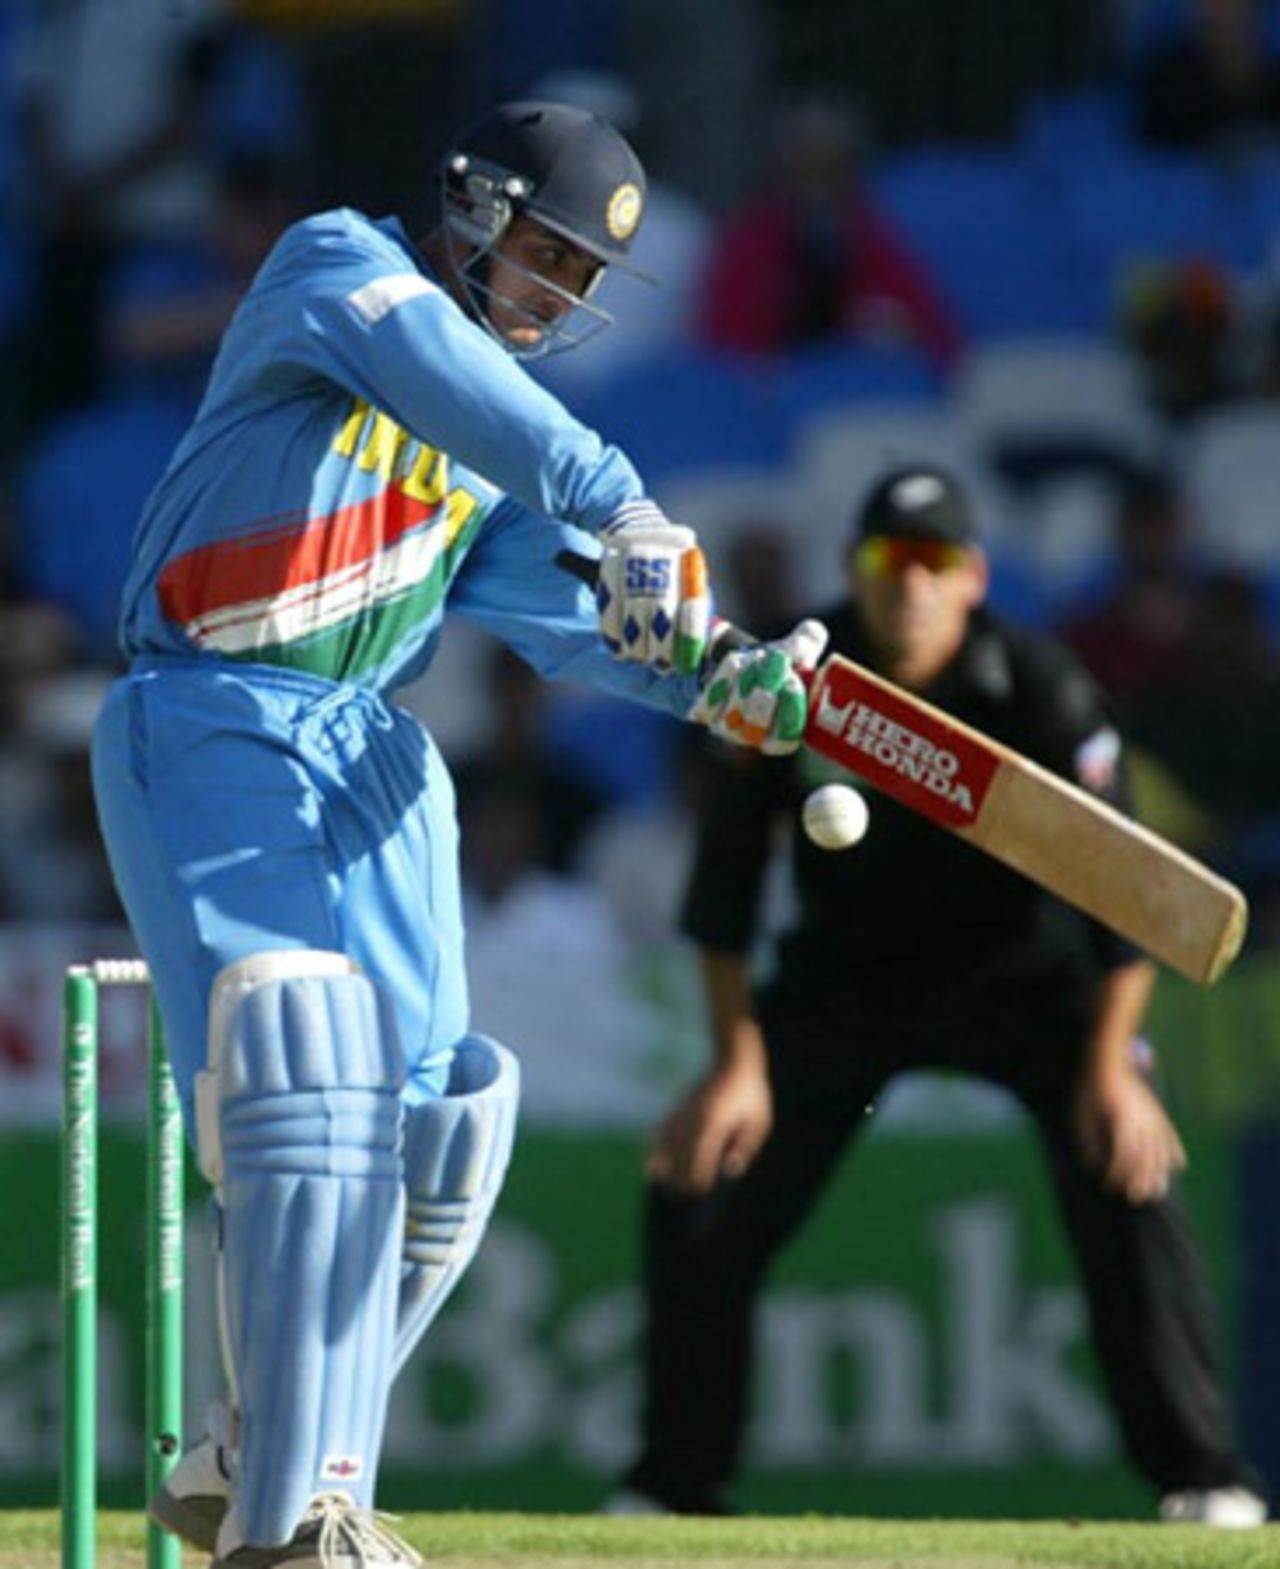 Indian batsman Sourav Ganguly shapes to play a delivery during his innings of 23. 6th ODI: New Zealand v India at Eden Park, Auckland, 11 January 2003.